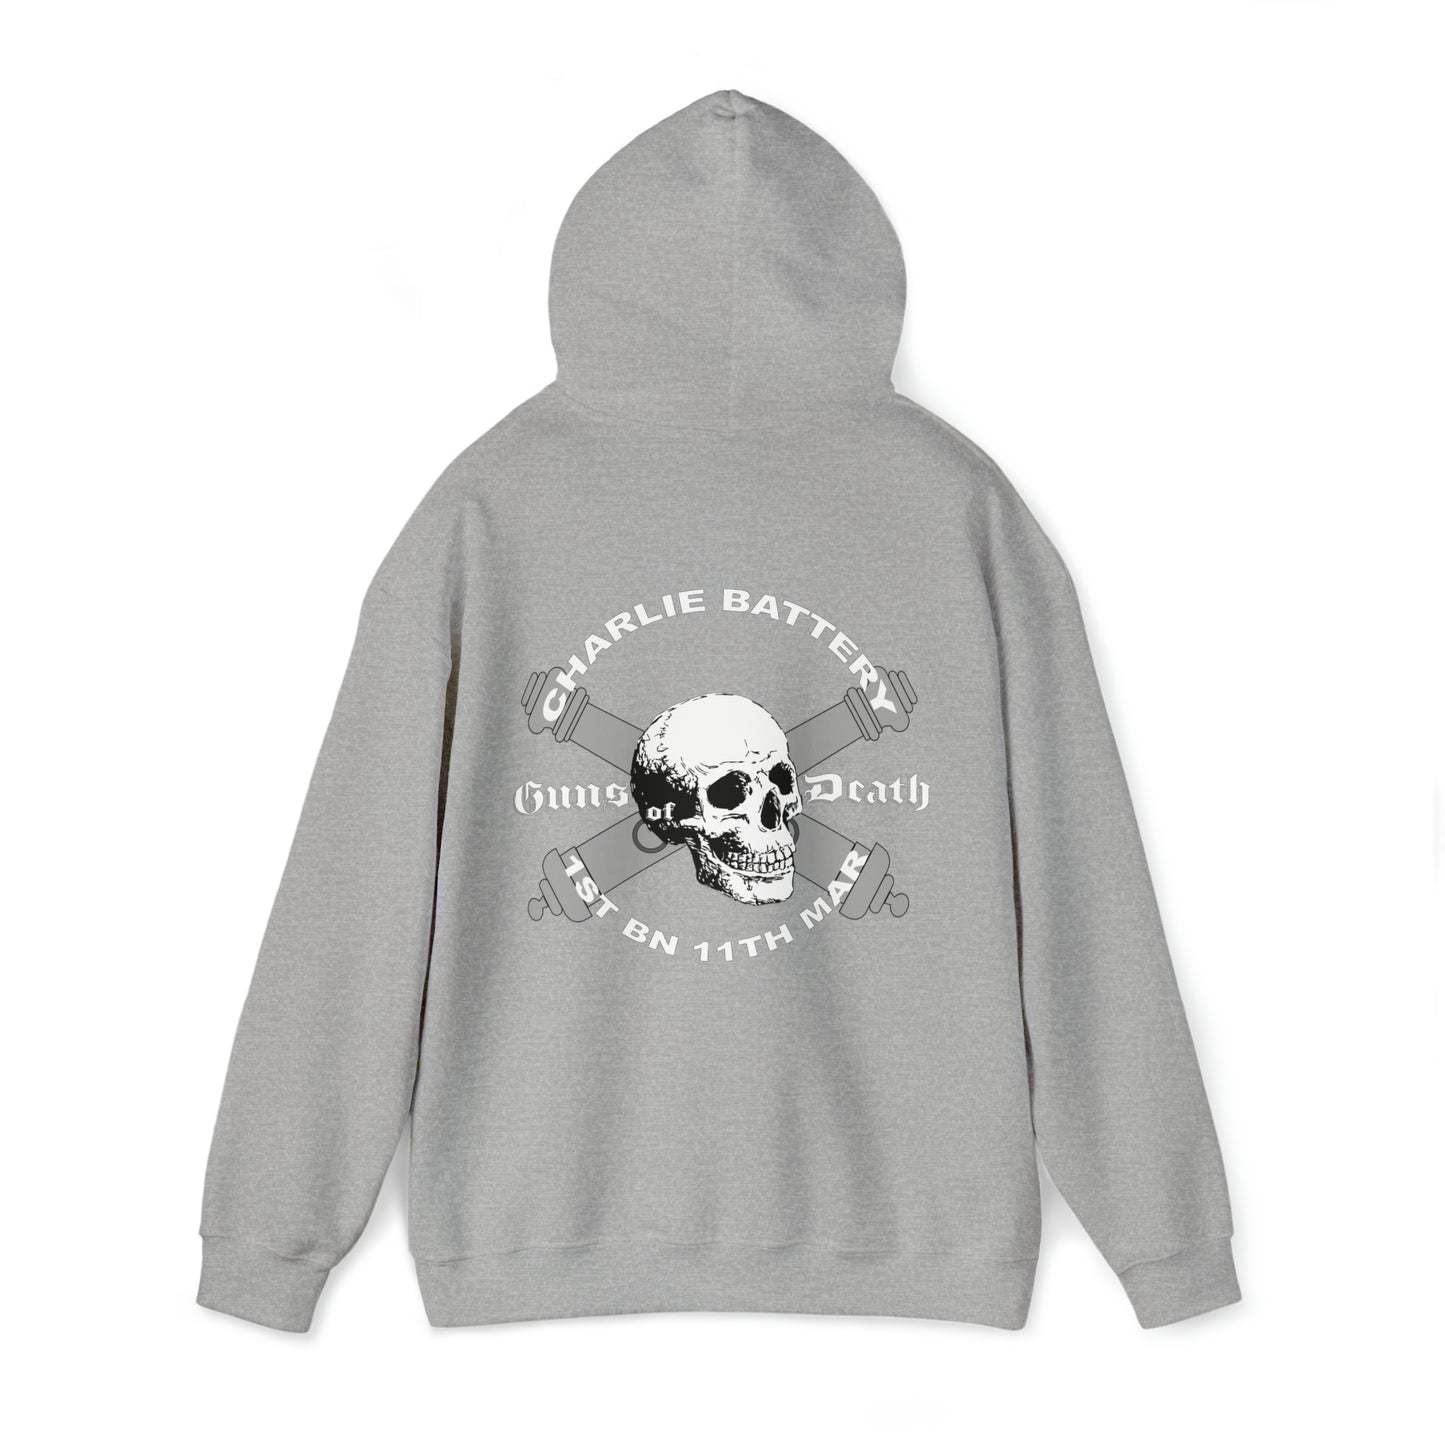 Charlie Battery 3rd Battalion 11th Marines Hoodie